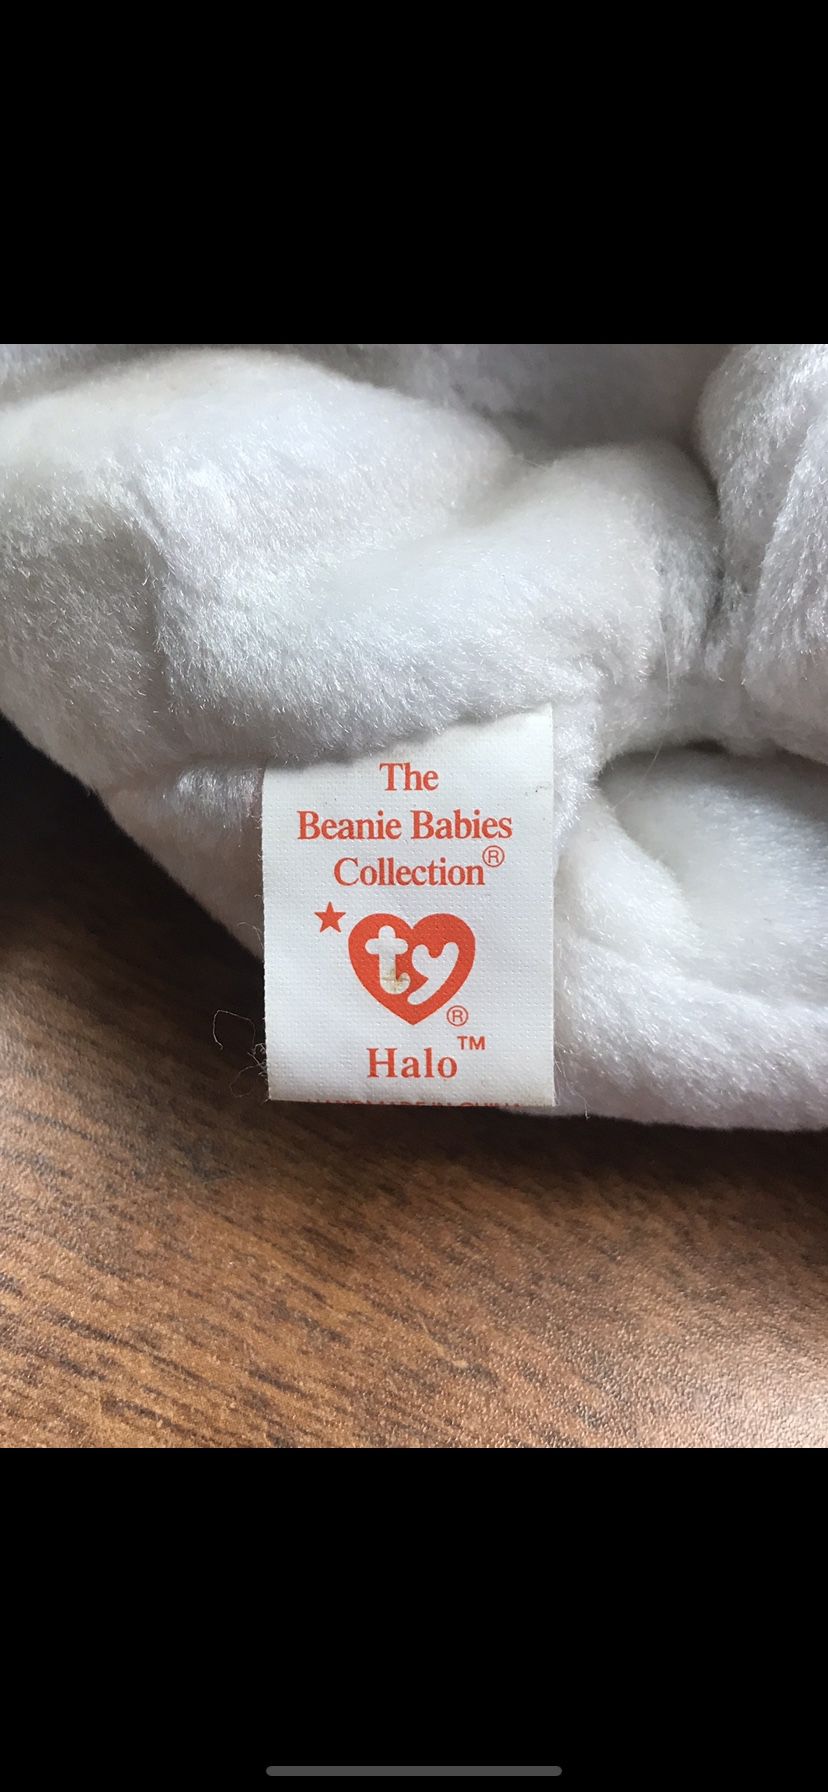 Halo Ty Beanie Baby Mint Condition   $200 obo 